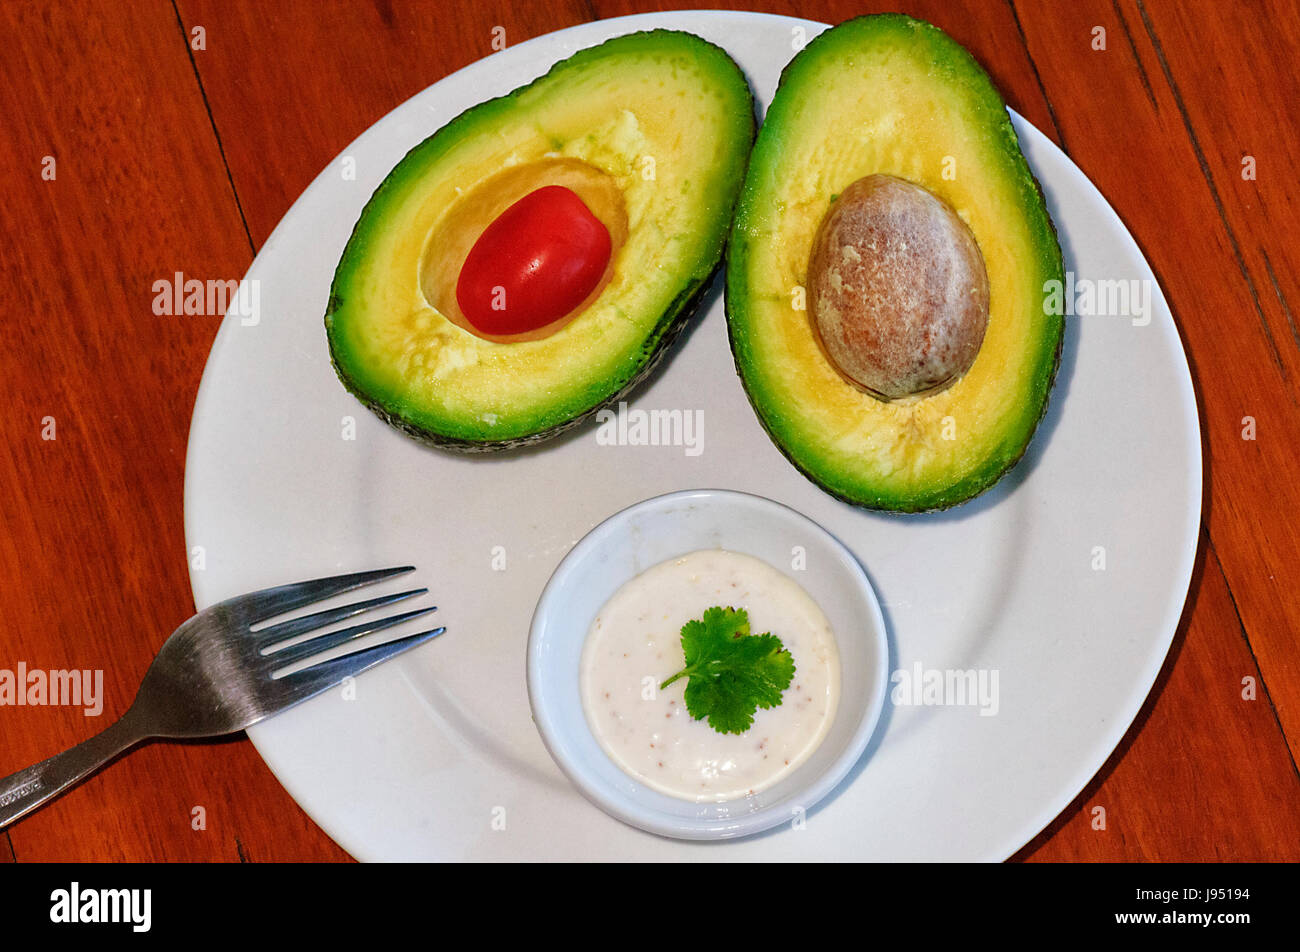 Avocado pear cut in two halves, with tomato and Aioli Sauce Stock Photo